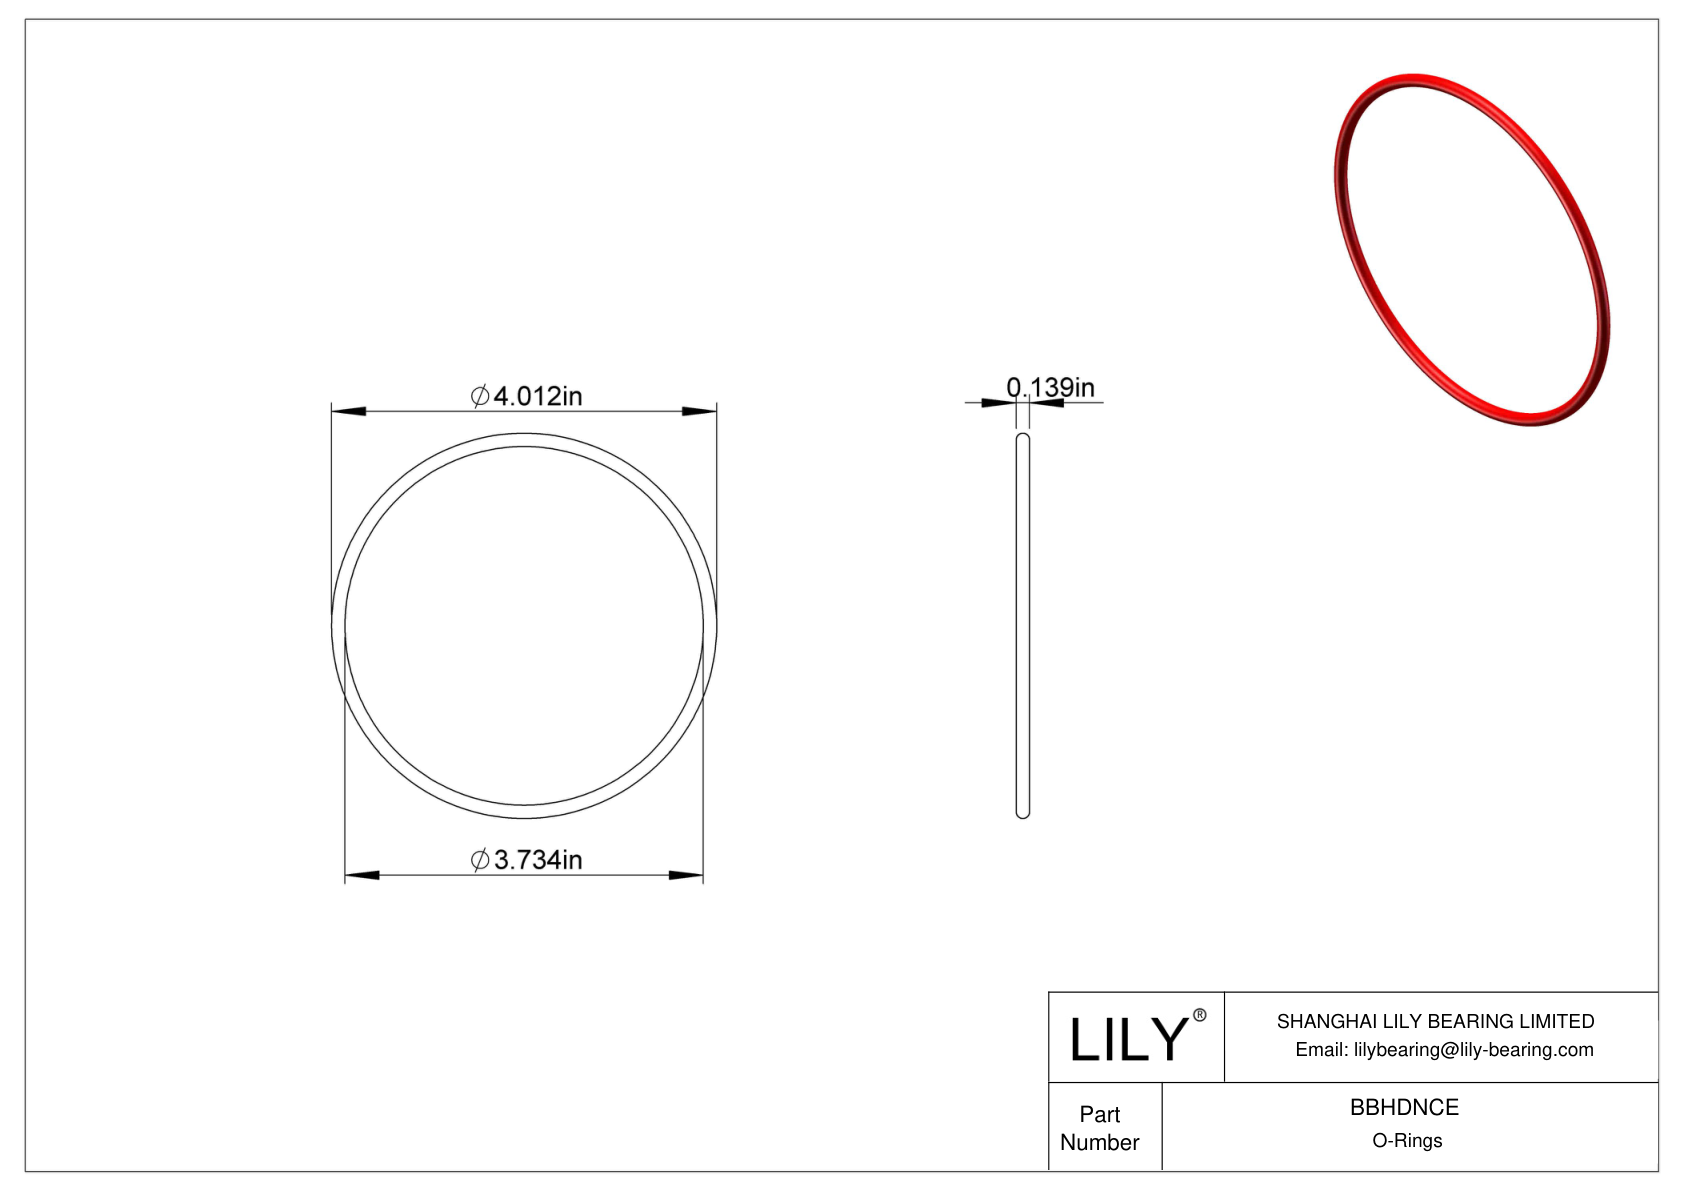 BBHDNCE High Temperature O-Rings Round cad drawing